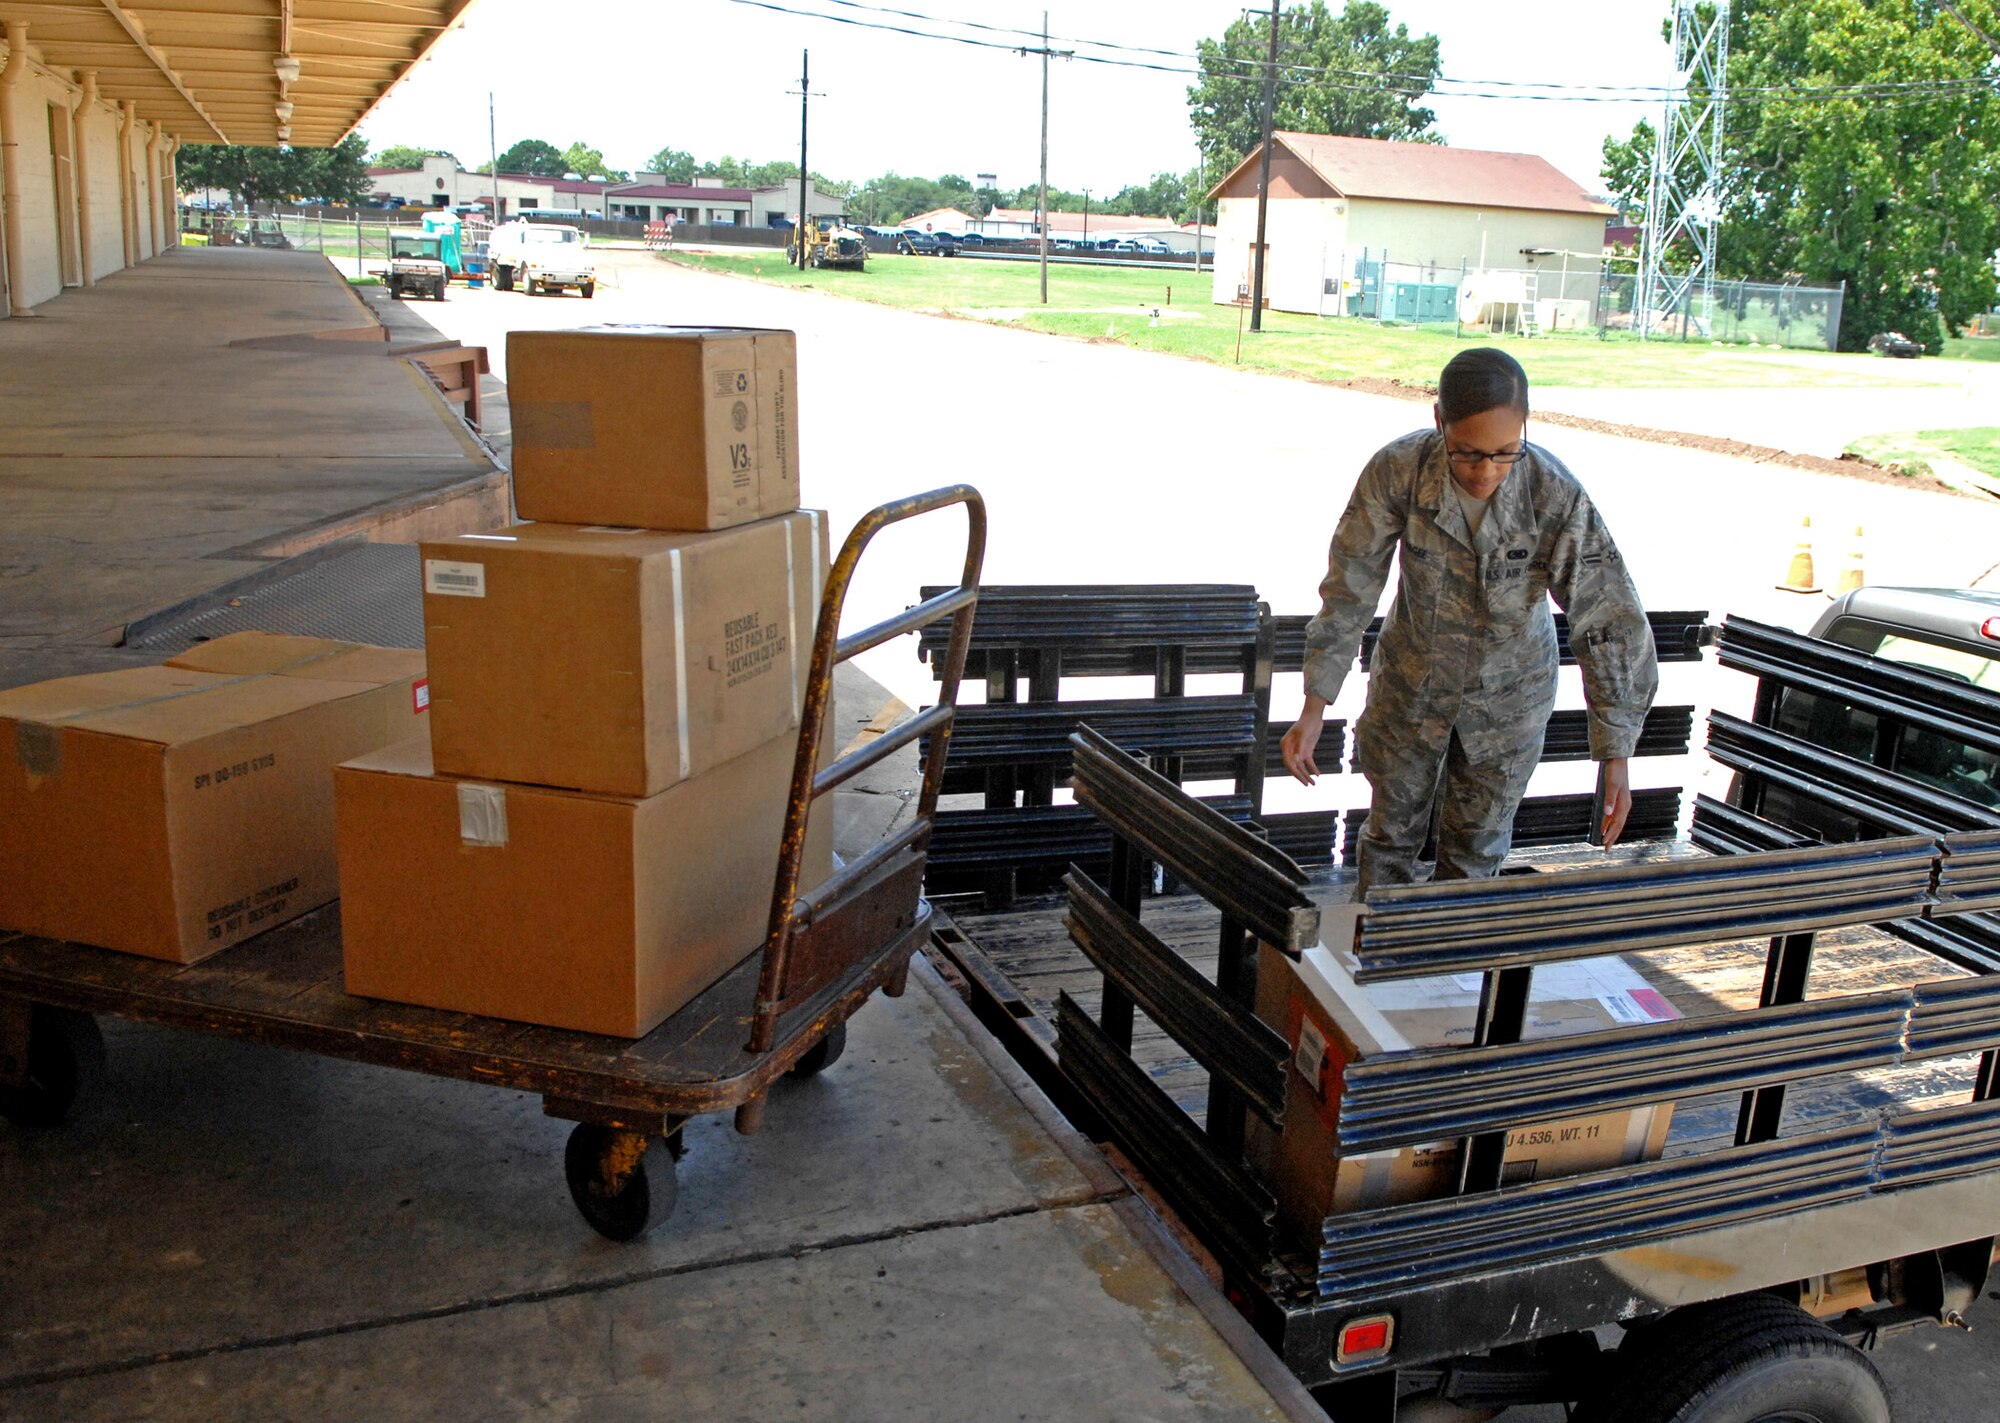 Airman 1st Class Gabrielle Magee, 2nd Logistics Readiness Squadron Aircraft Parts Store apprentice, picks up ordered parts at the main 2 LRS warehouse on Barksdale Air Force Base, La., July 18. The 24-hour APS stores more than 700 parts at the flightline warehouse for quick access to fix problems on the B-52H Stratofortress. (U.S. Air Force photo/Staff Sgt. Jason McCasland)(RELEASED)